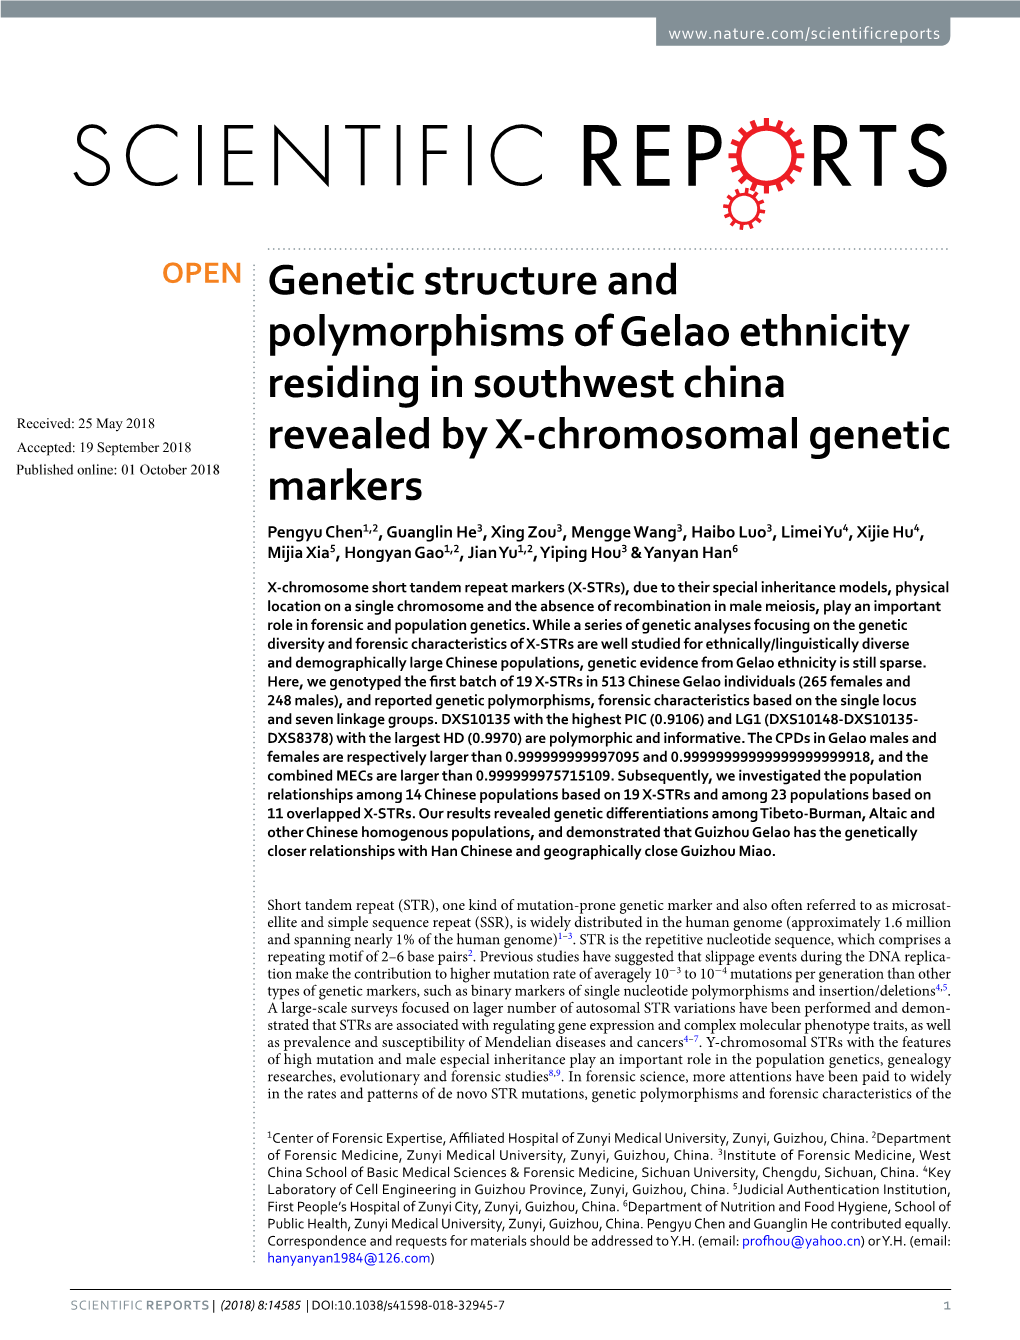 Genetic Structure and Polymorphisms of Gelao Ethnicity Residing in Southwest China Revealed by X-Chromosomal Genetic Markers